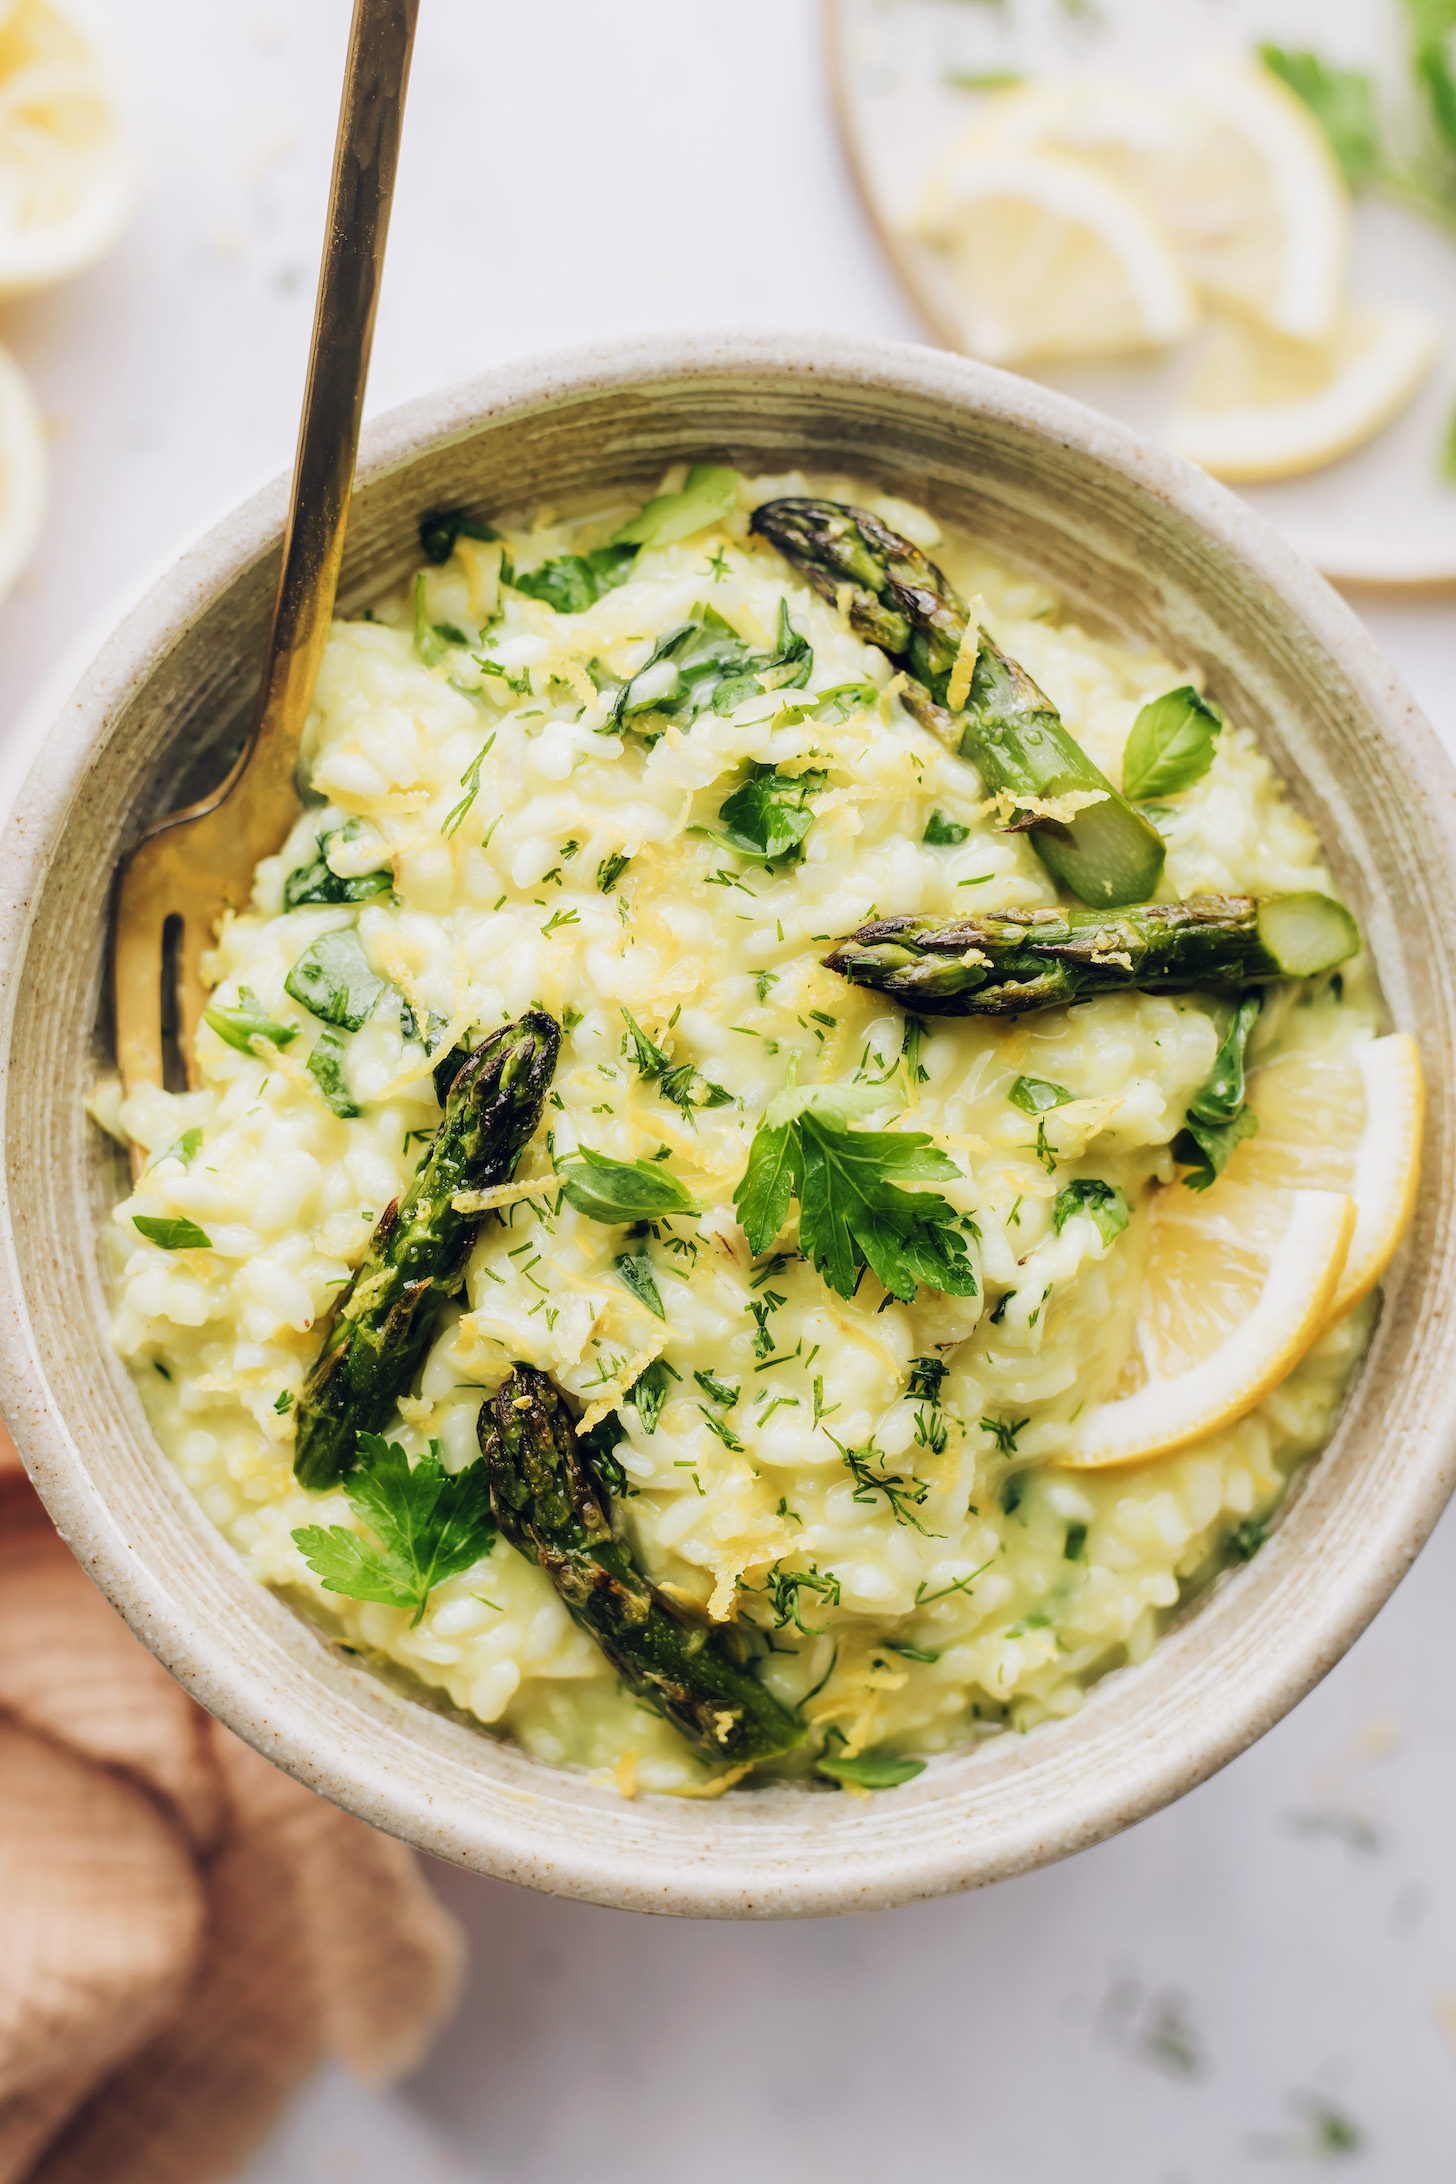 Lemon and herb risotto served with roasted asparagus